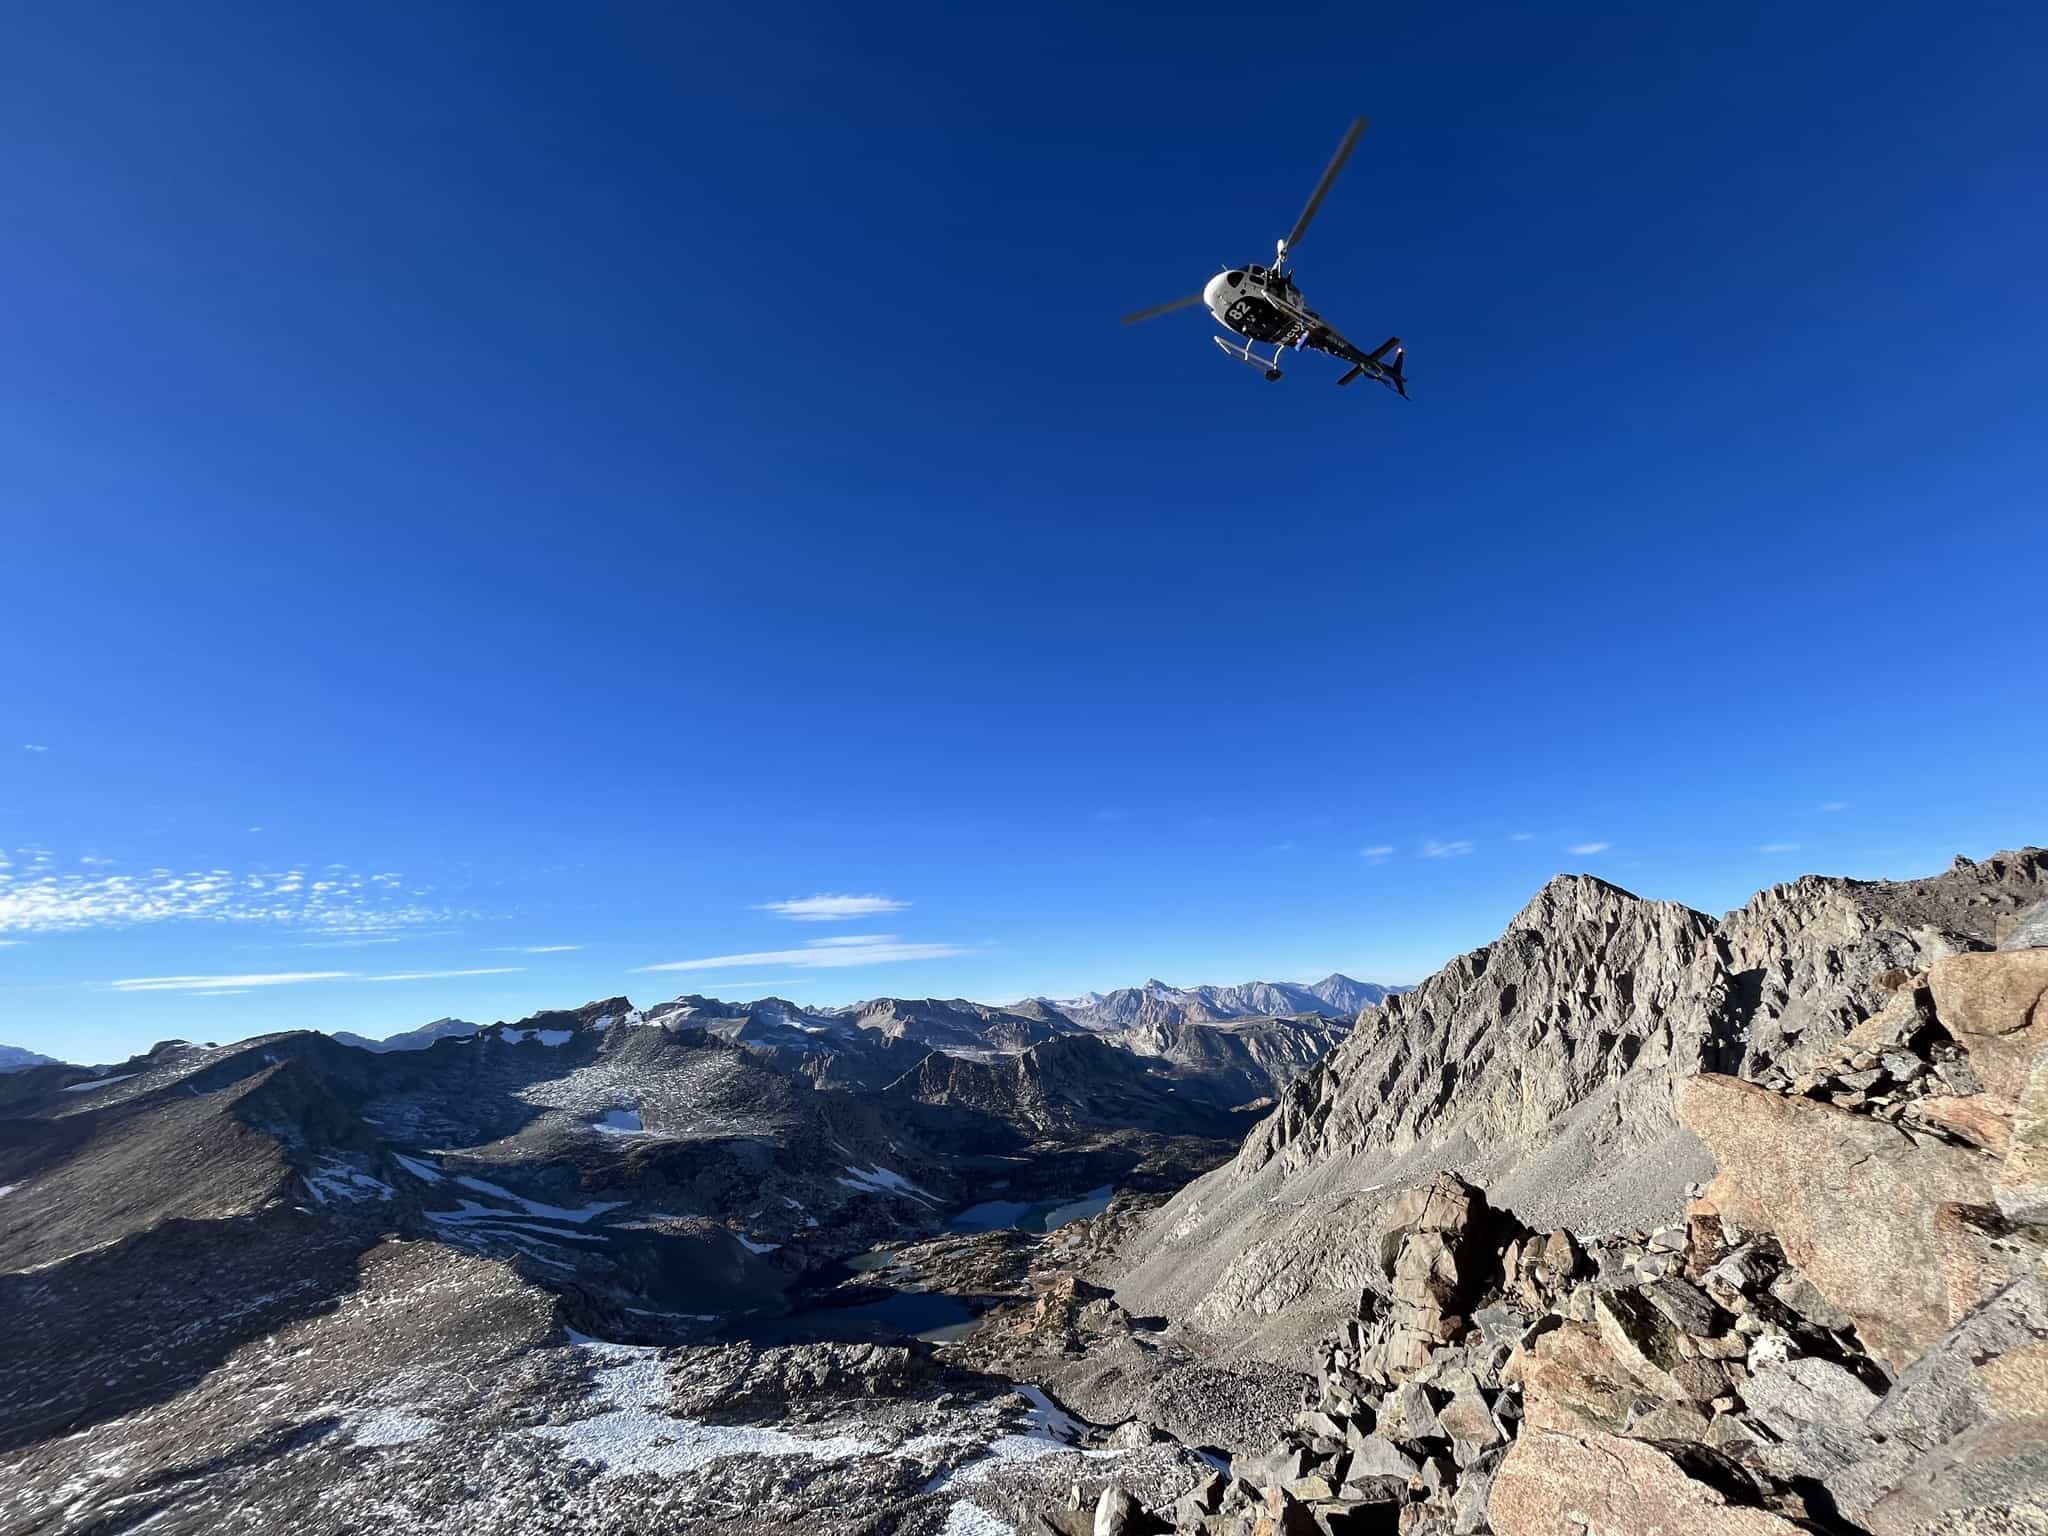 helicopter searching mountain terrain for overdue climber in bright blue sky